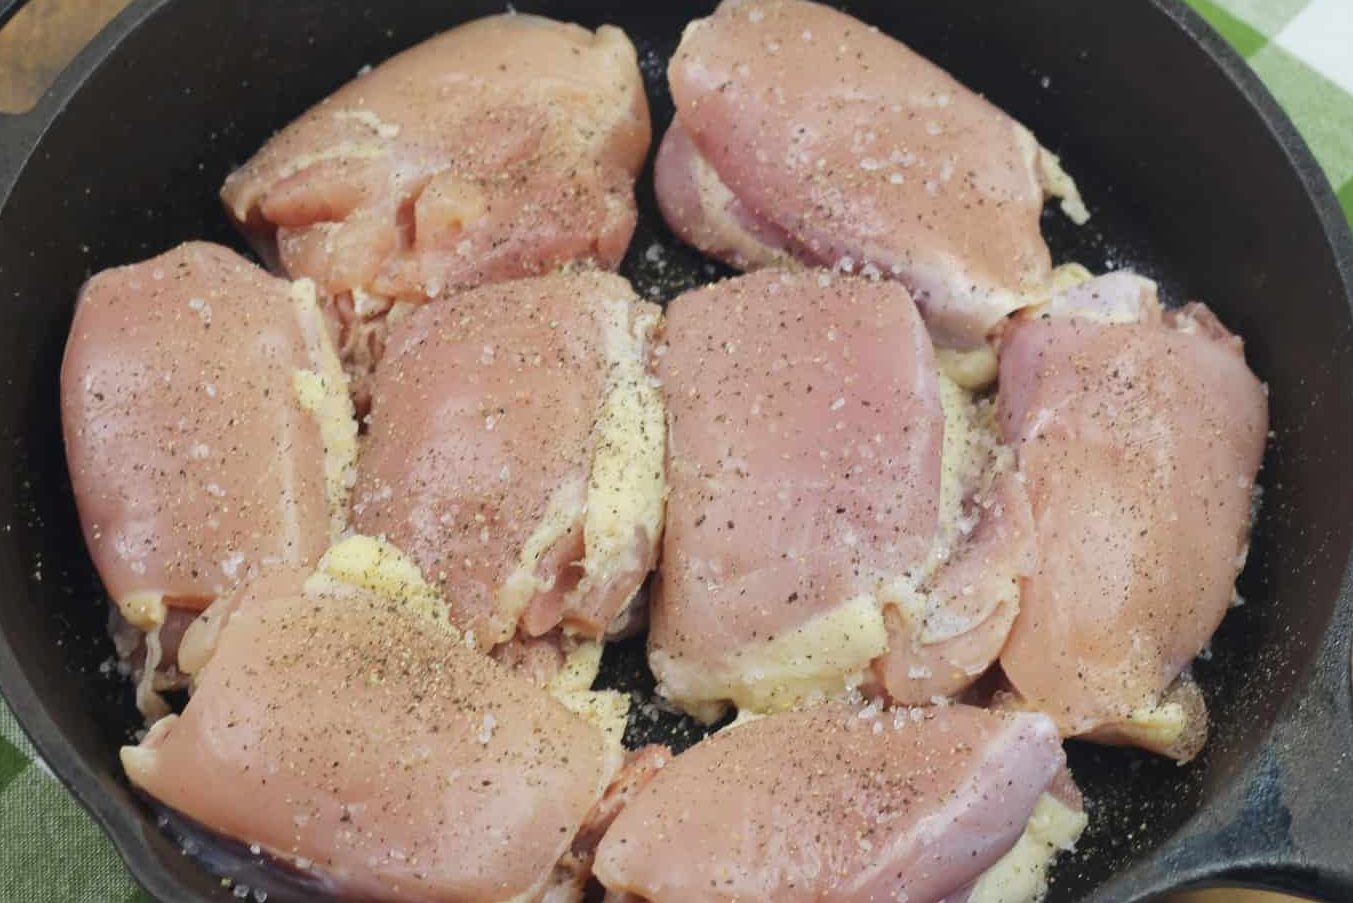 Using a cast iron, place the chicken into the cast iron.